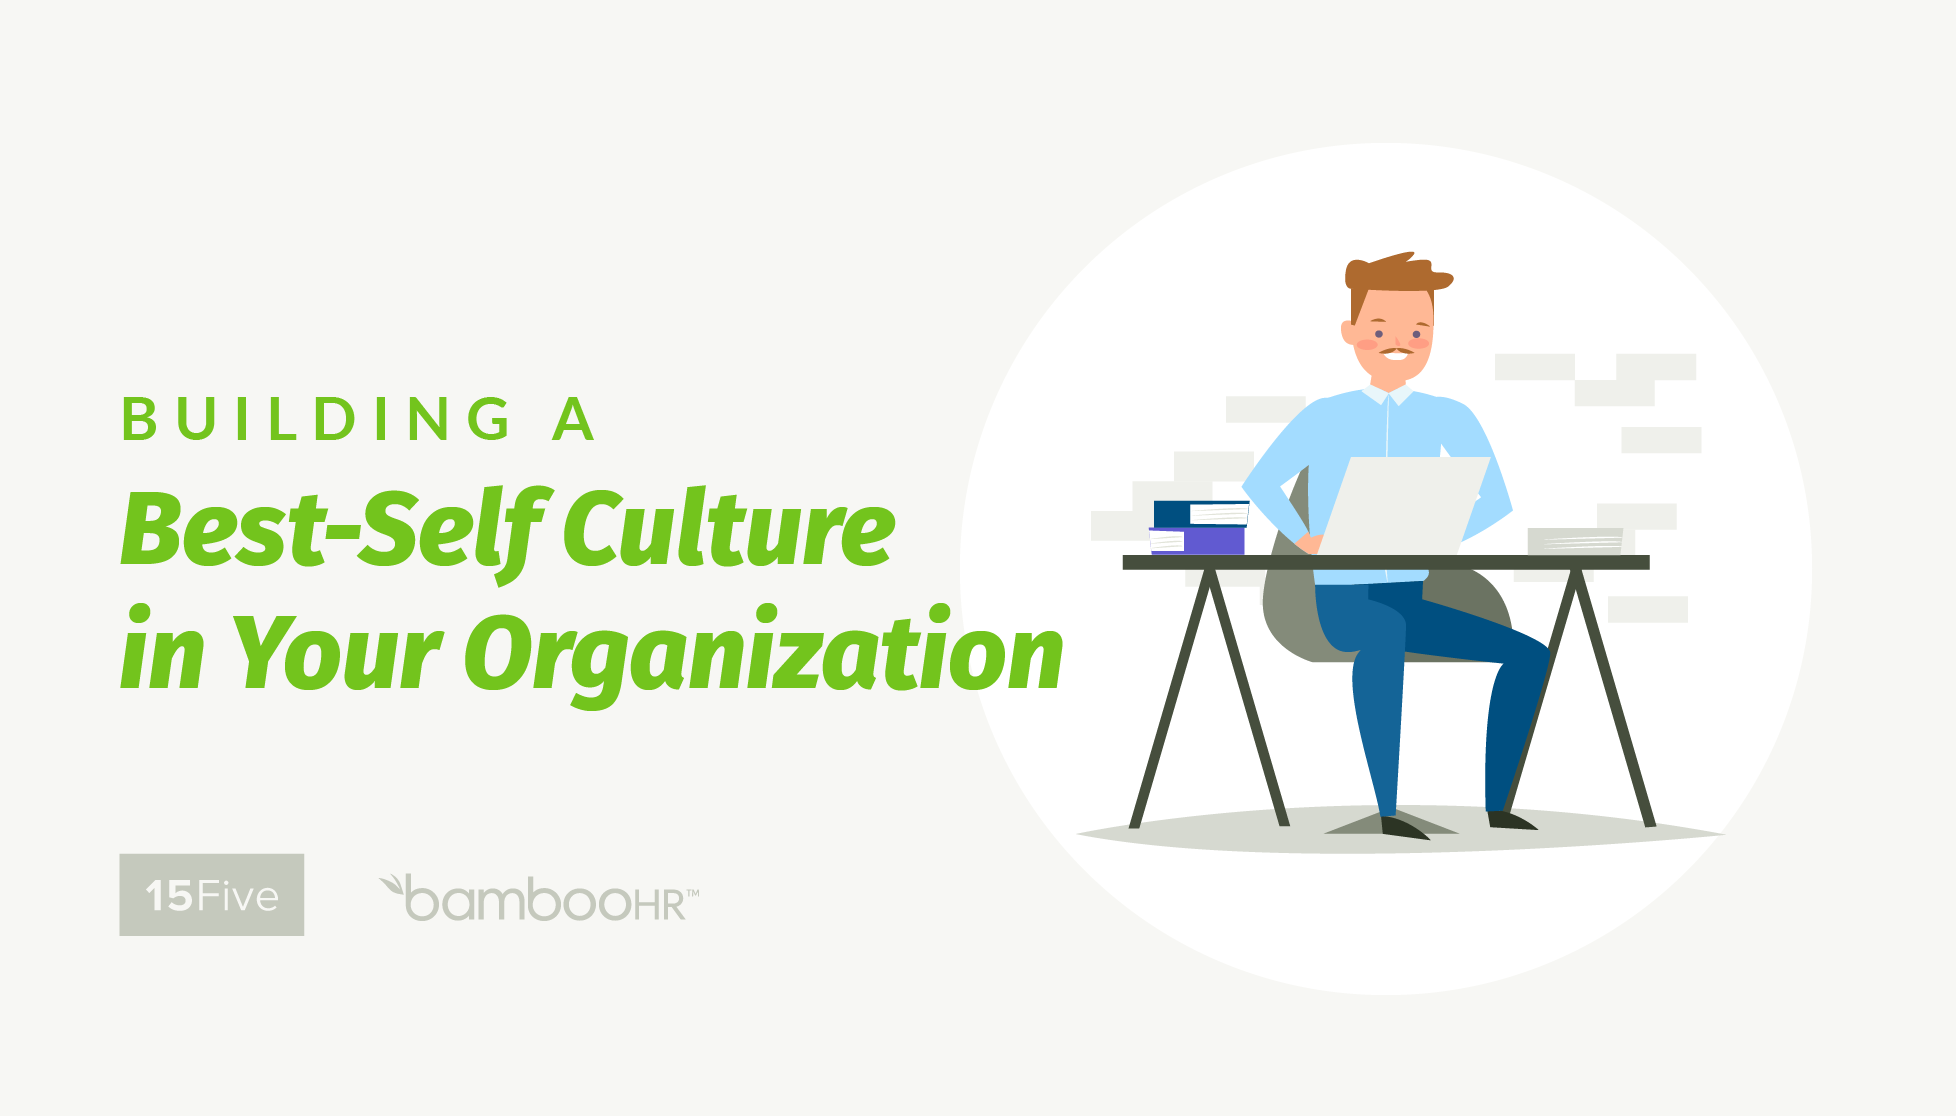 Building a Best-Self Culture in Your Organization